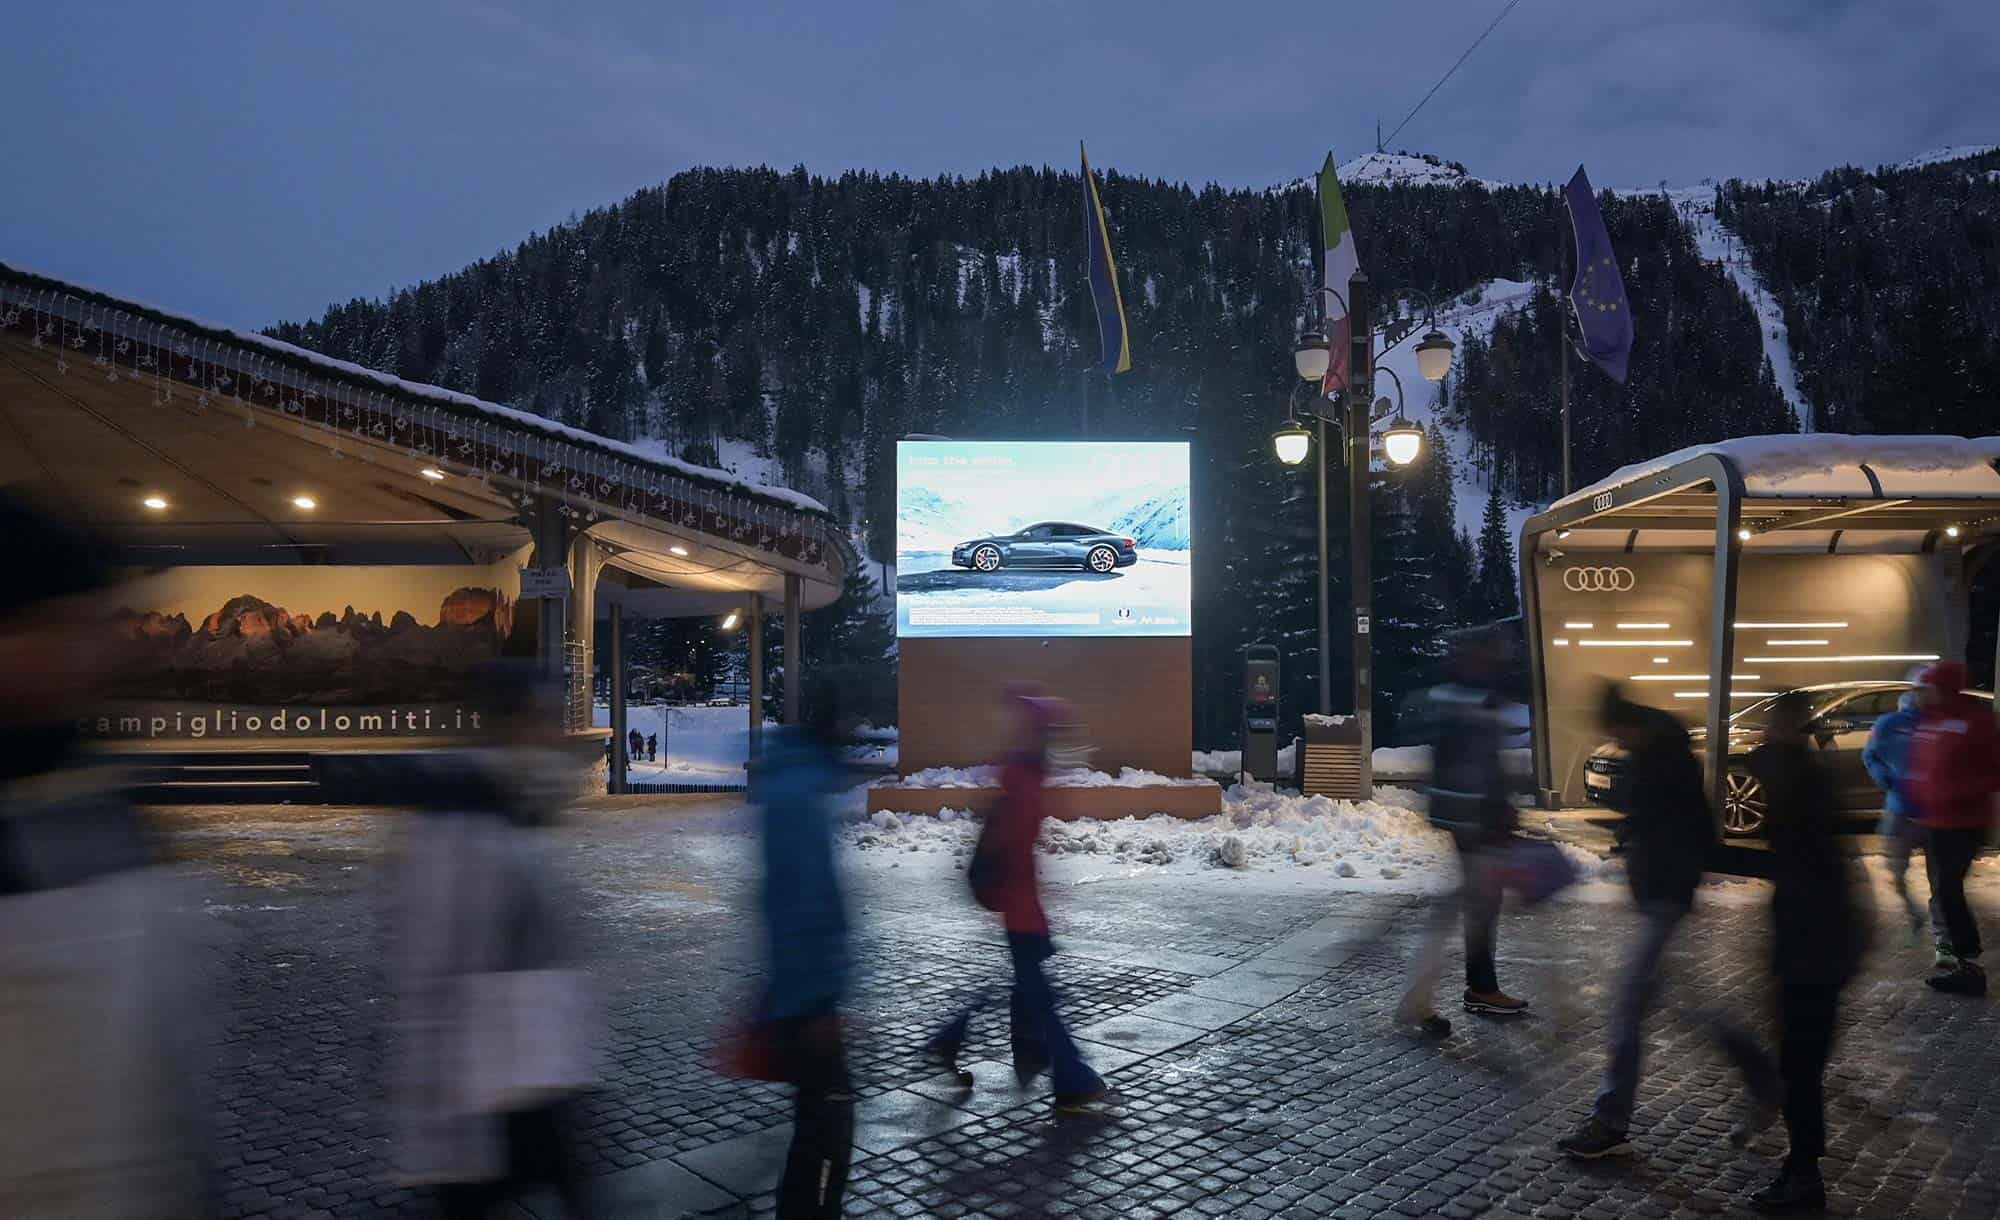 LED Wall in Piazza Sissi, madonna di Campiglio with Audi (automotive)